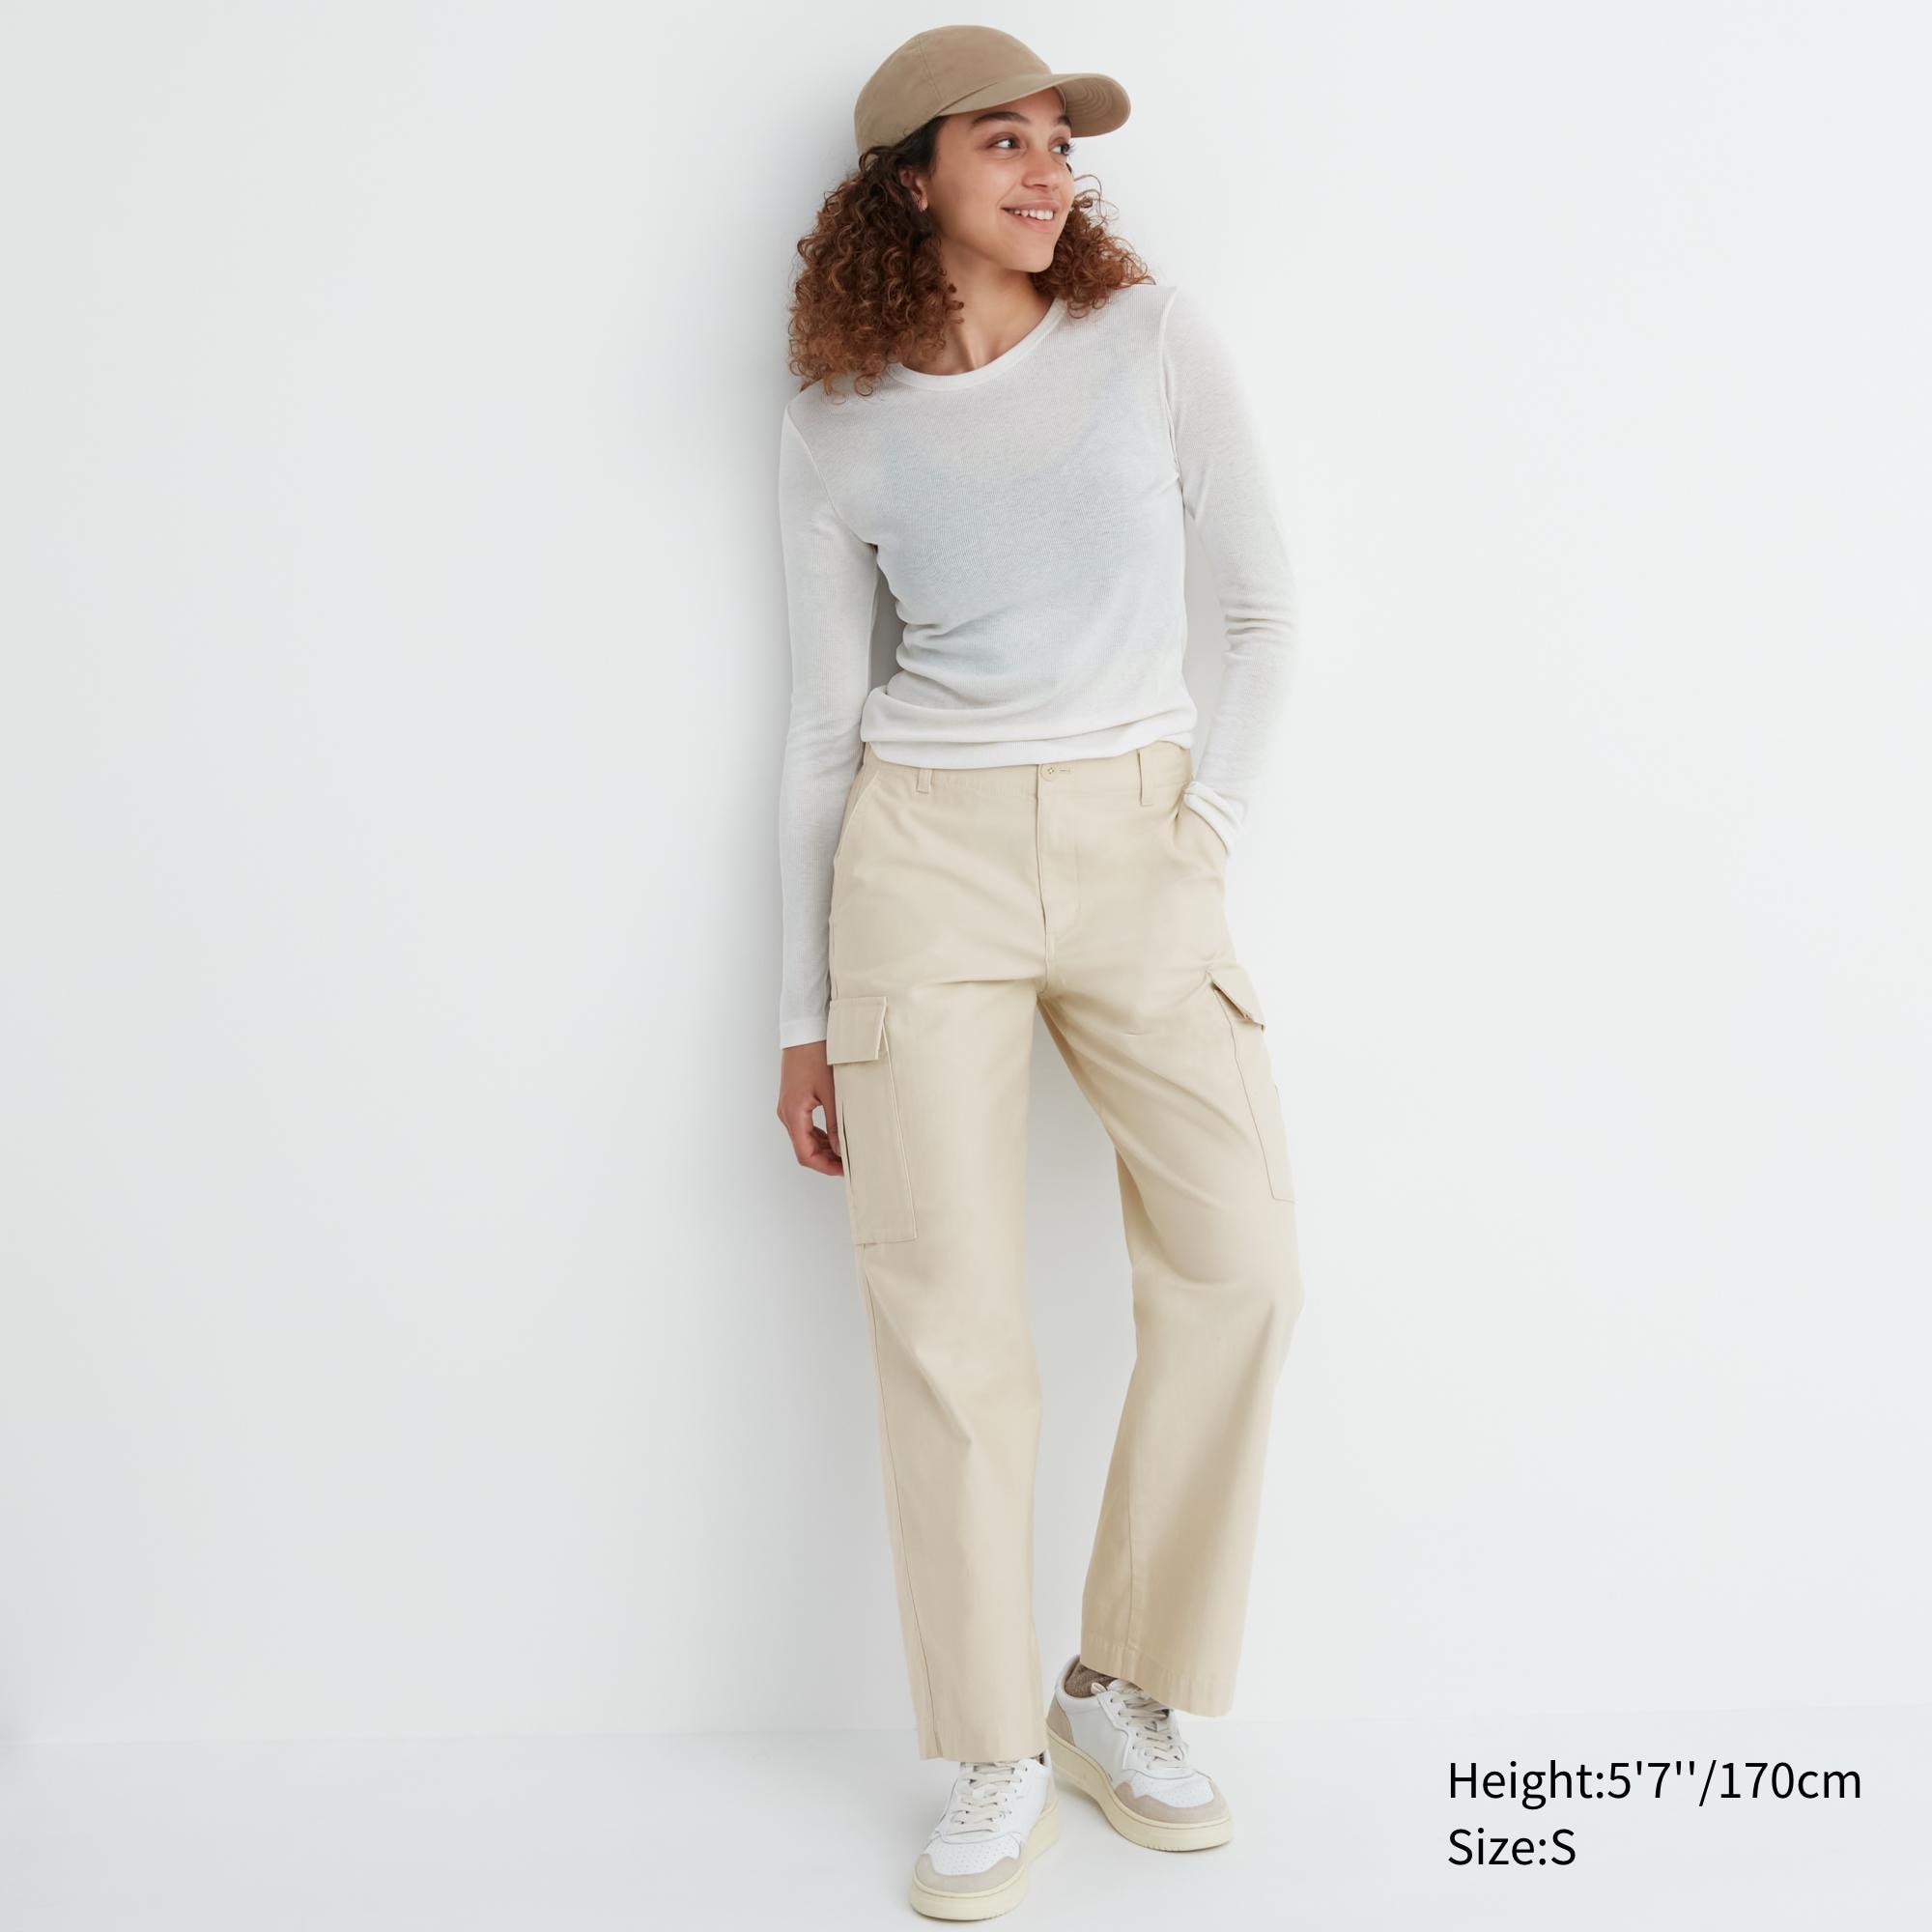 Autumn French Casual Women Clothing: Office Cotton Work Pant – Straight Leg  Pants